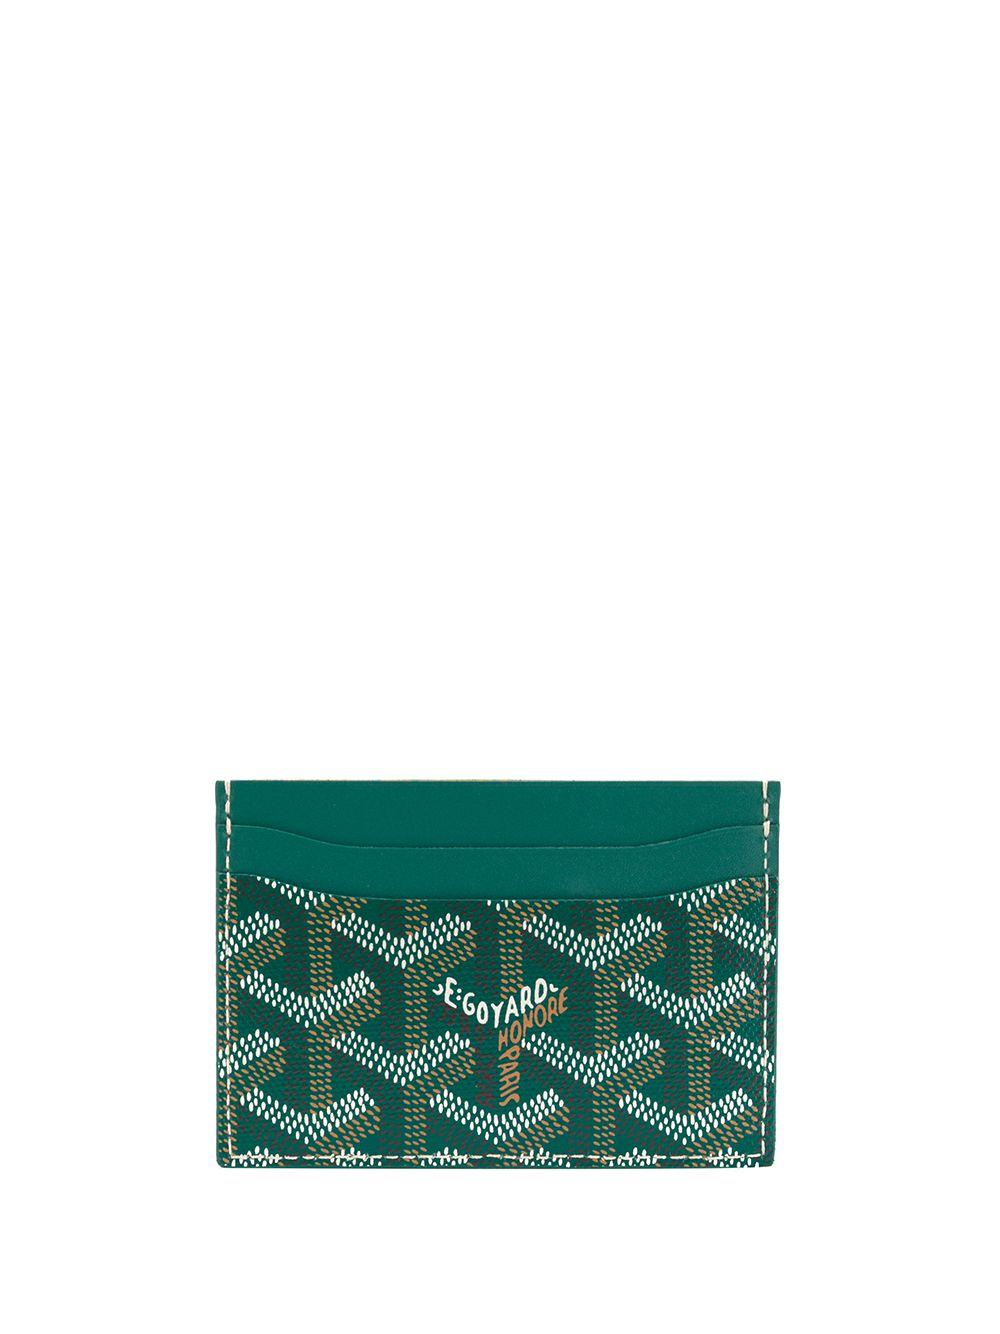 Crafted from Goyardine Canvas, a coloured textile made from cotton, linen and hemp, this dark green monogram Slot card Wallet from Goyard is adorned with an all-over cartoon print, especially hand-painted as a part of Rewind Vintage's Emotional